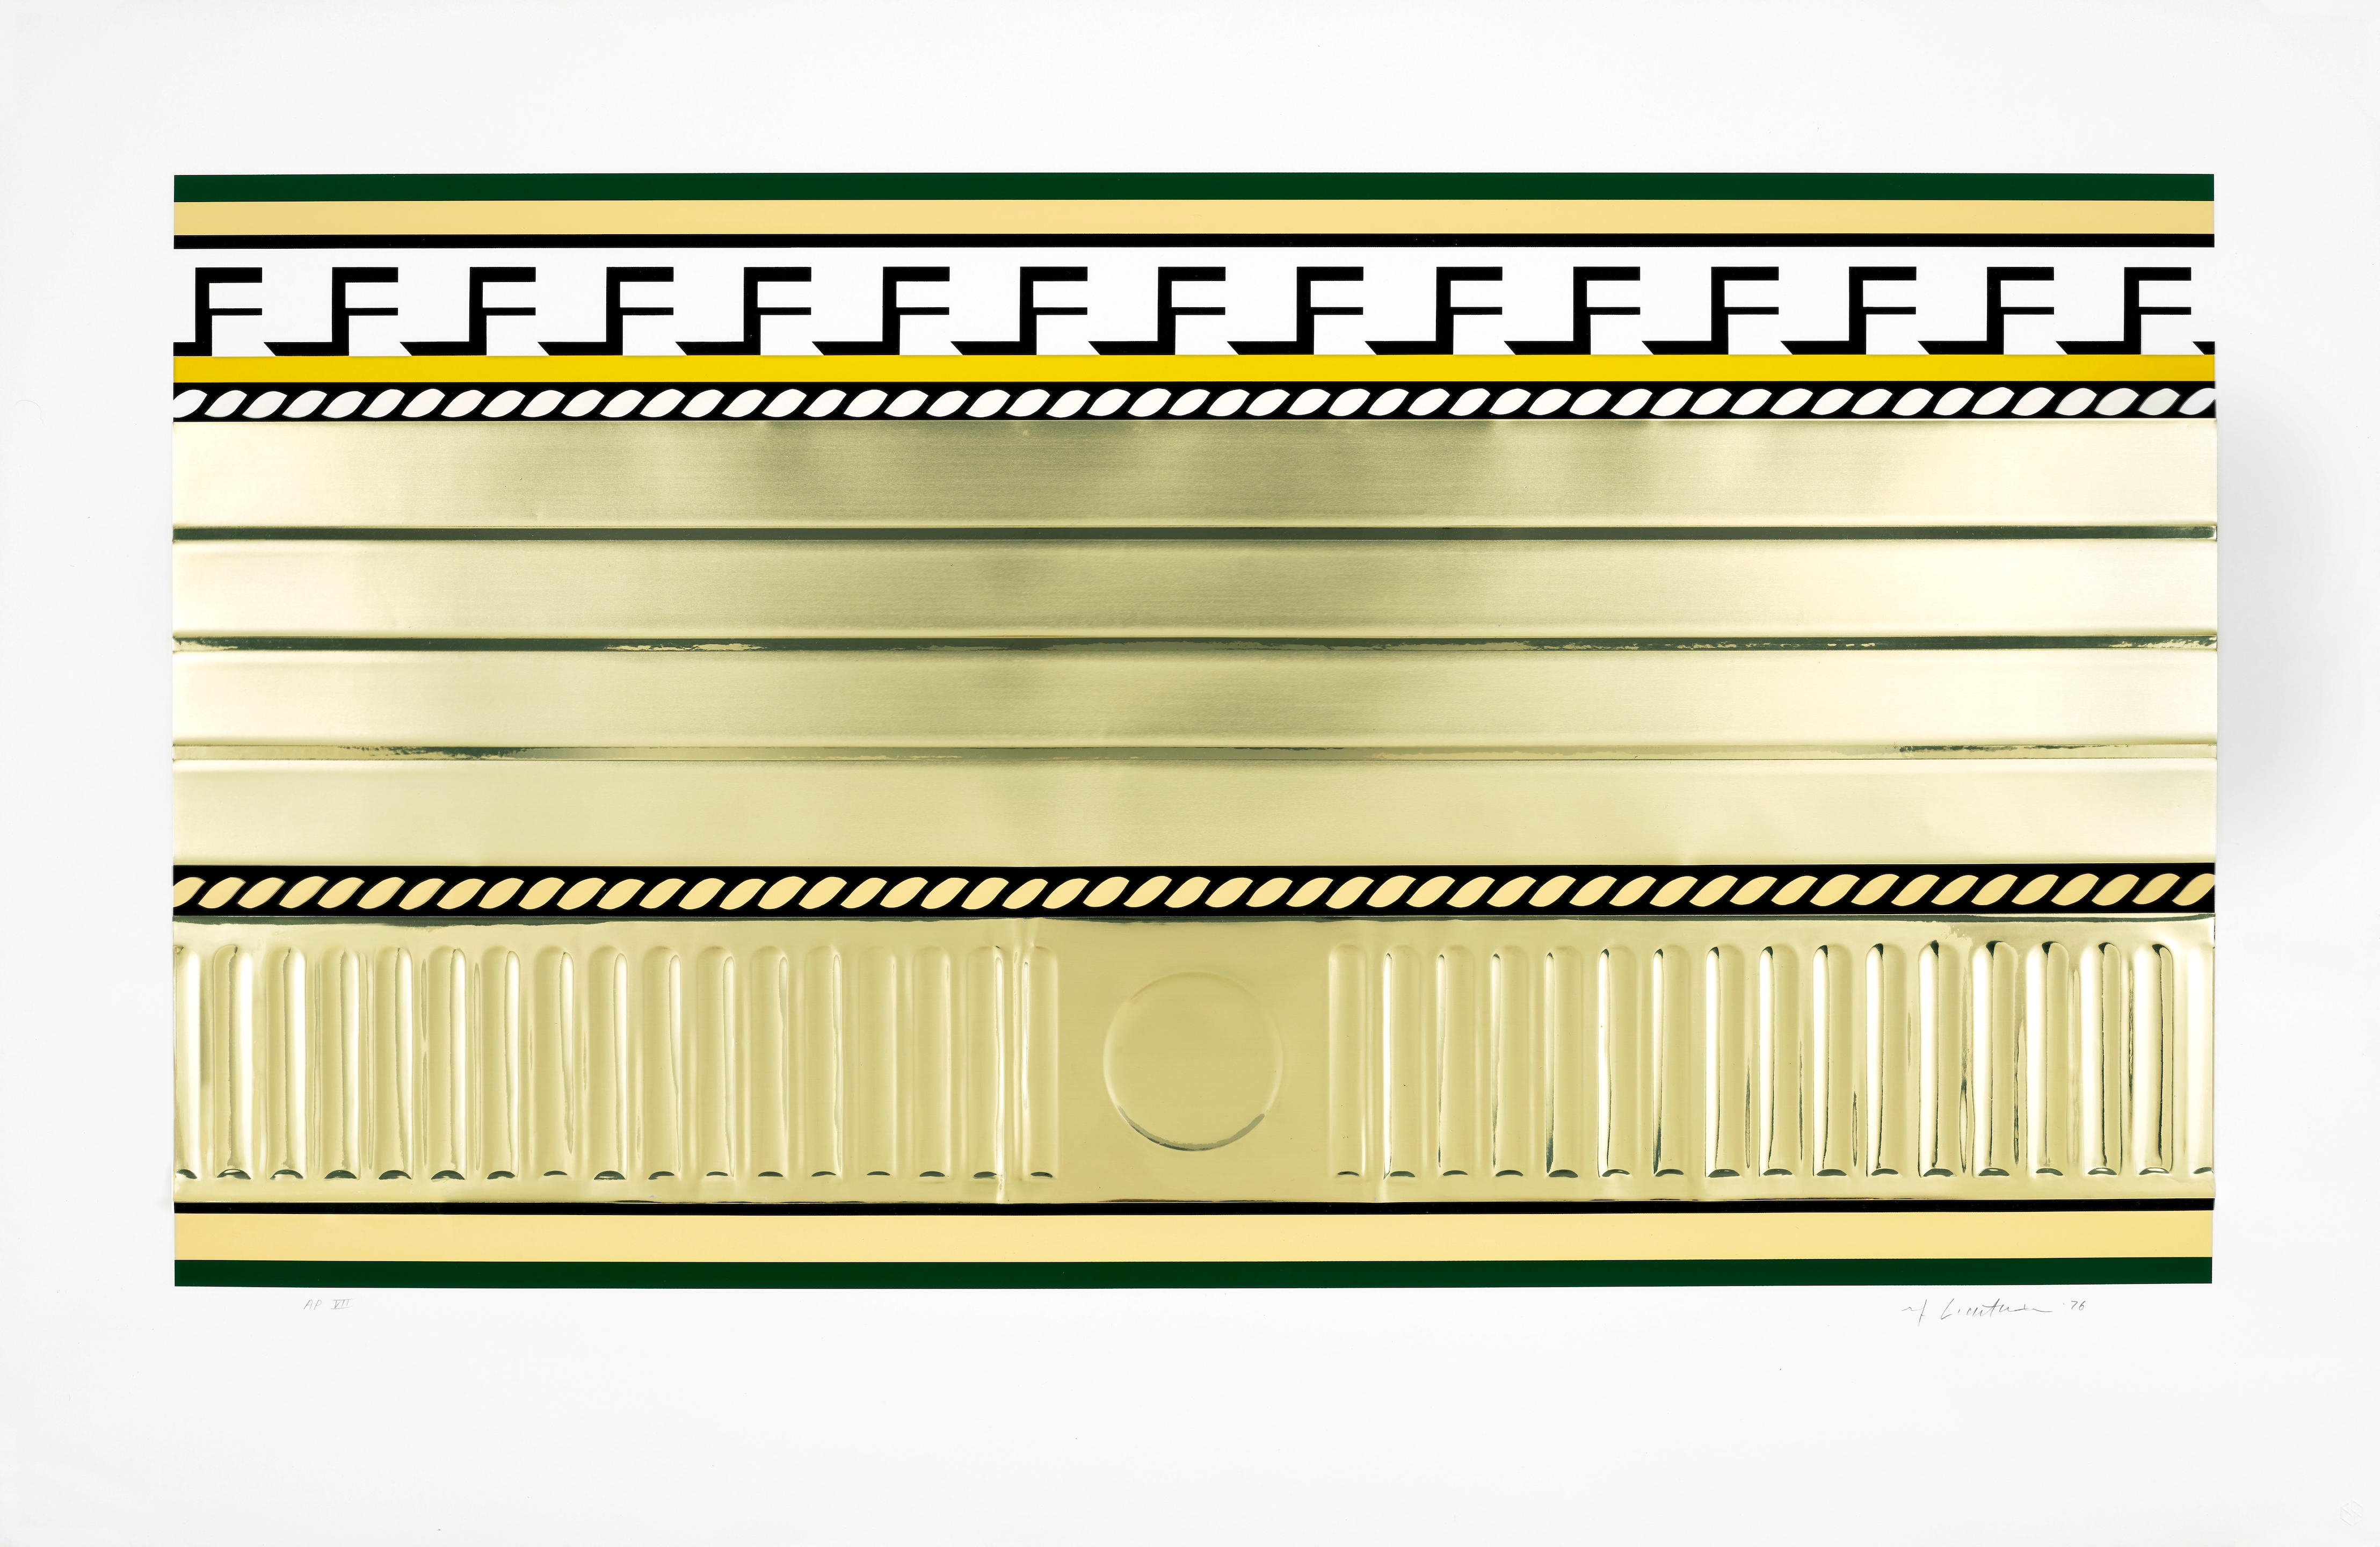 Artwork by Roy Lichtenstein, Entablature V, from Entablature Series, Made of Screenprint, lithograph and collage in colors with embossing on Rives BFK paper